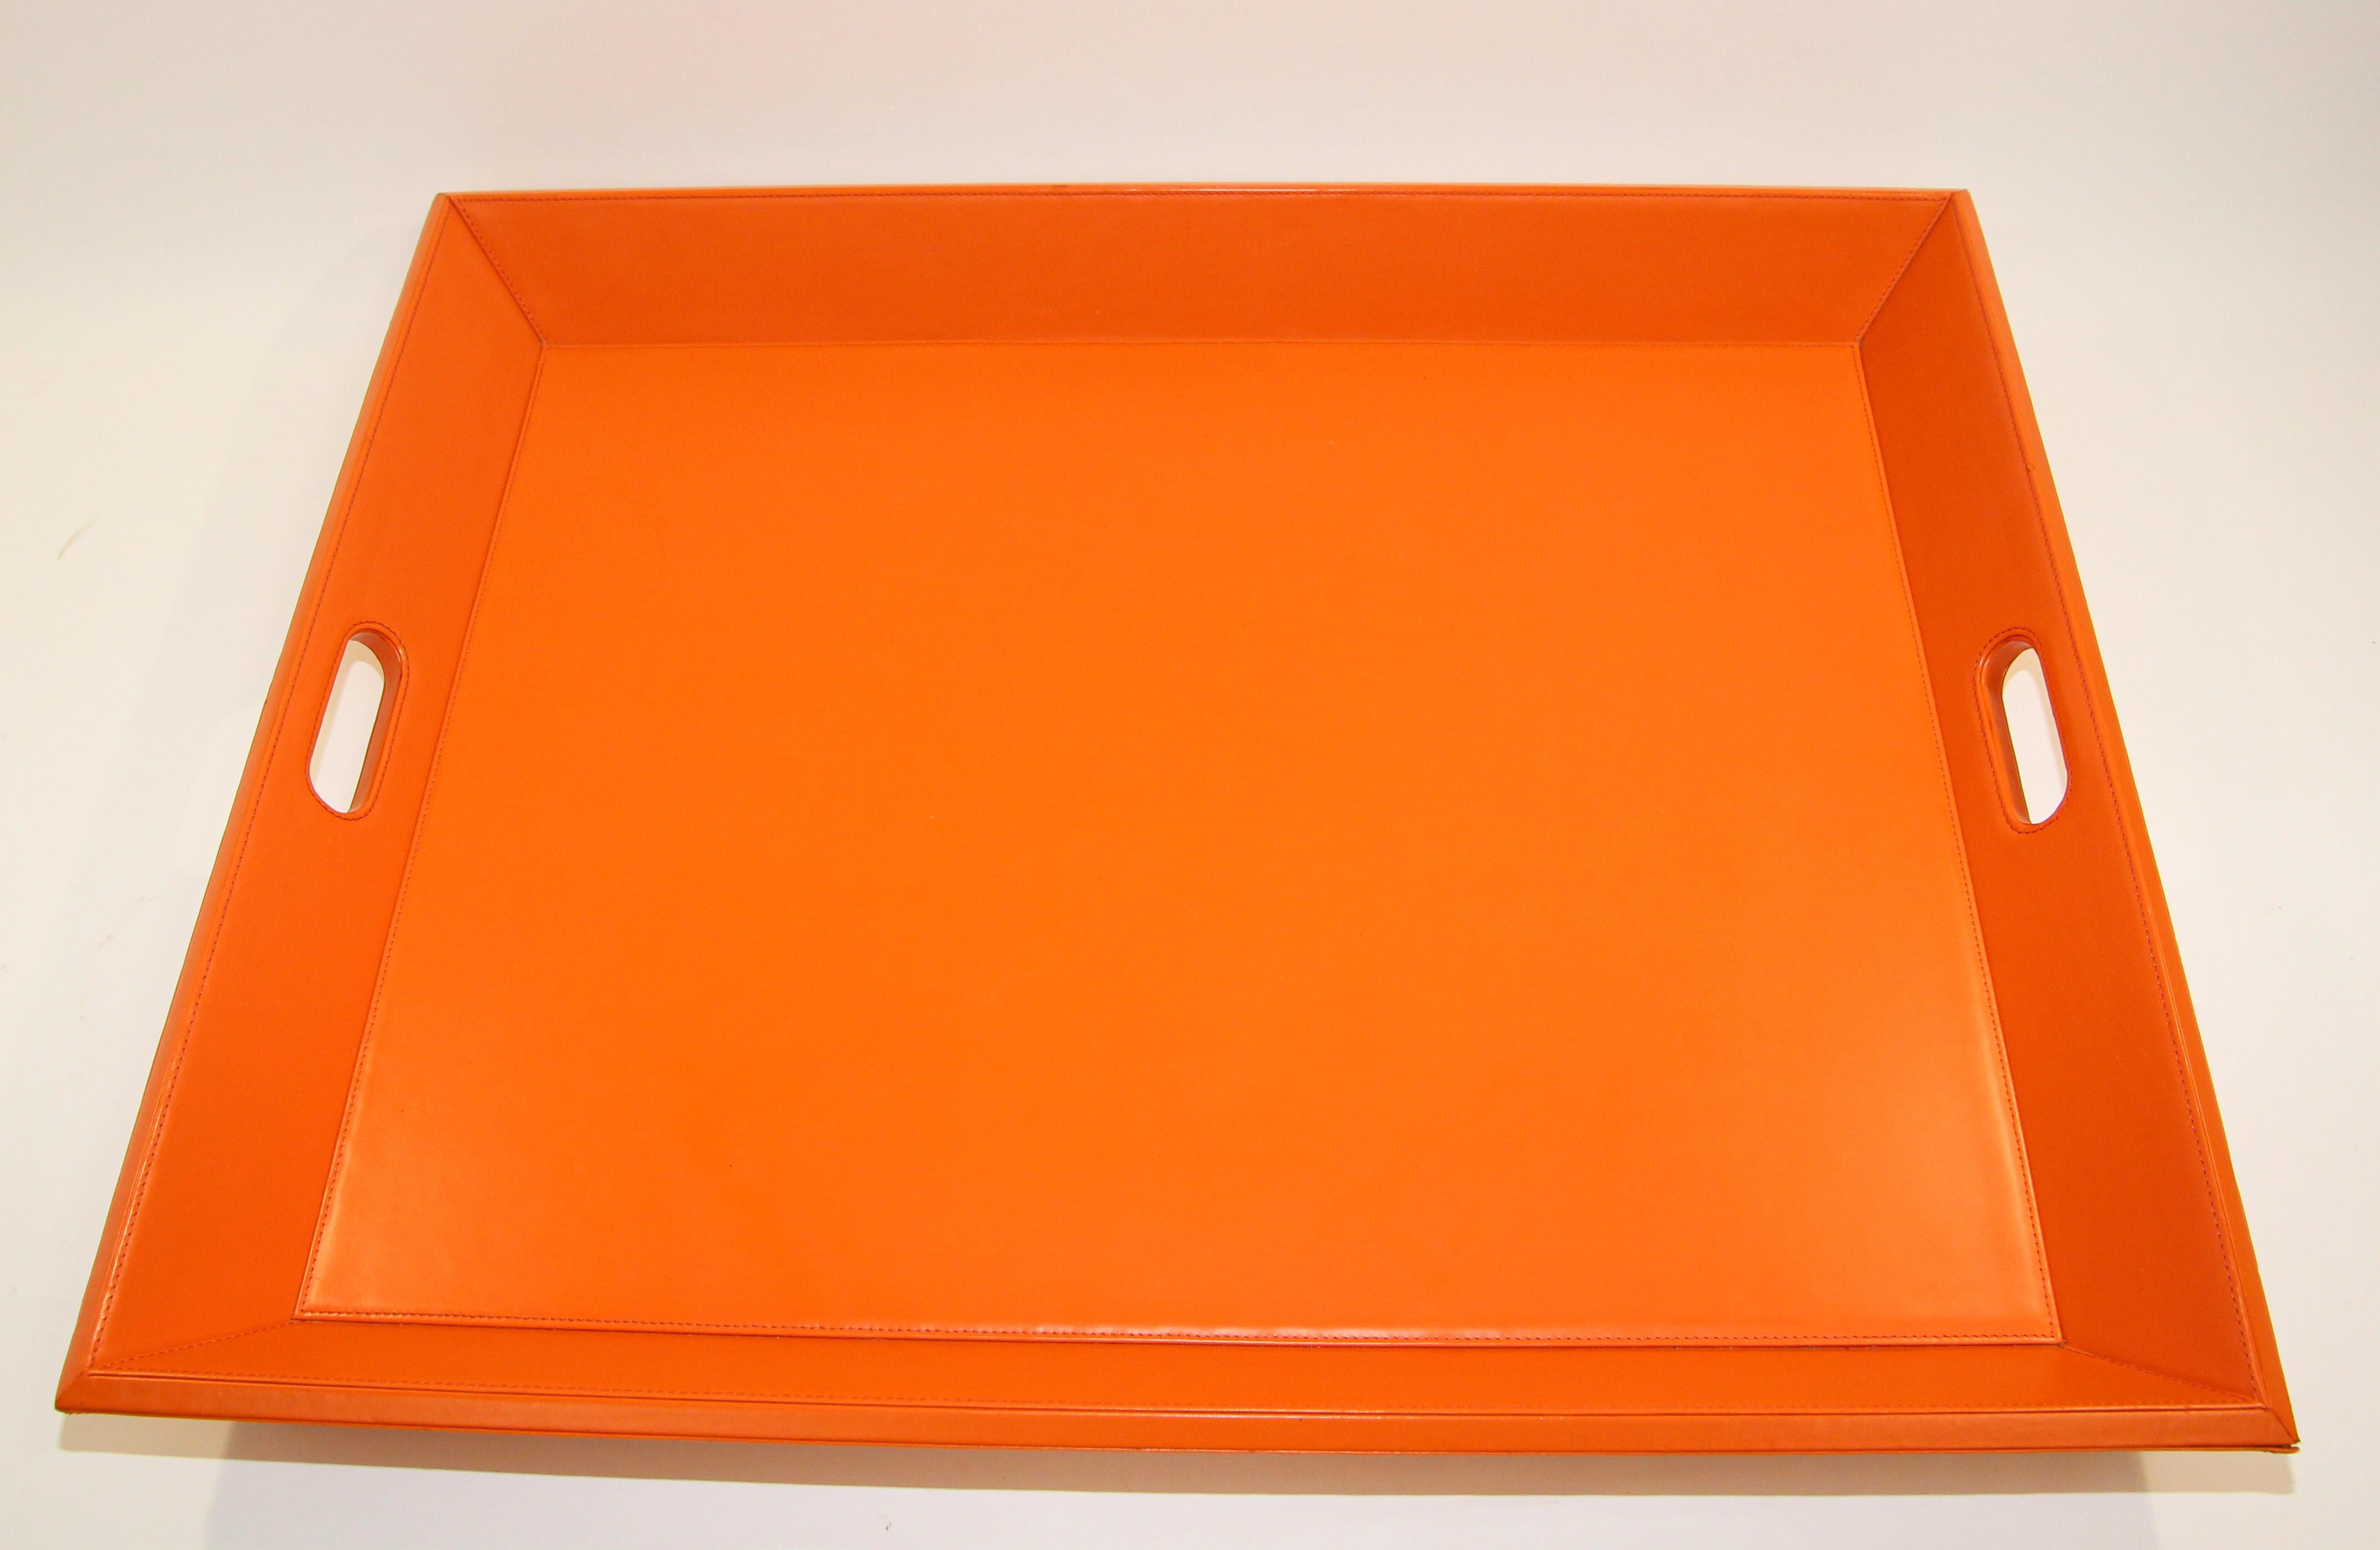 Large vintage orange tray with handles by Williams Sonoma Home
Large orange coffee table ottoman faux leather tray with handles.
The tray is made of faux leather with coordinated stitching and cut out handles at each end make it easy to move the